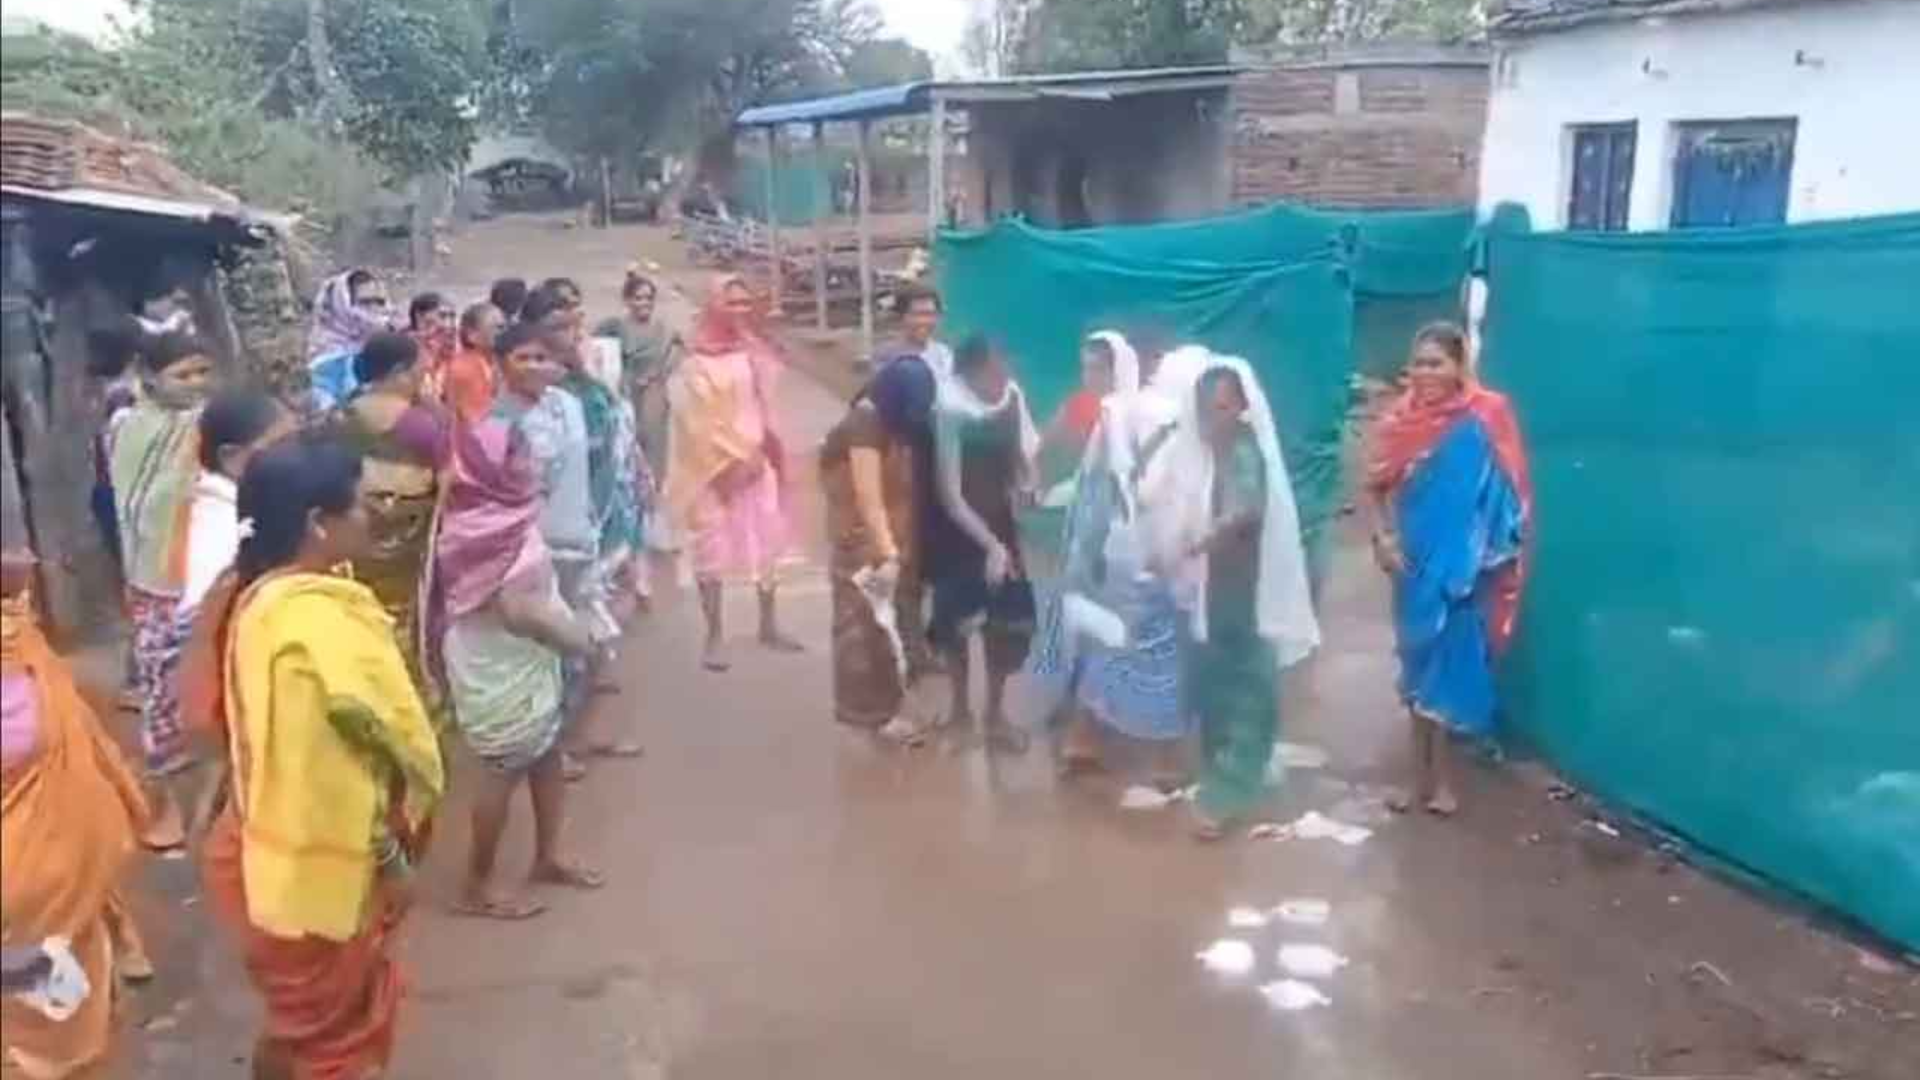 Adilabad Adivasi Women Demand Action from Government Against Adulterated Toddy Liquor